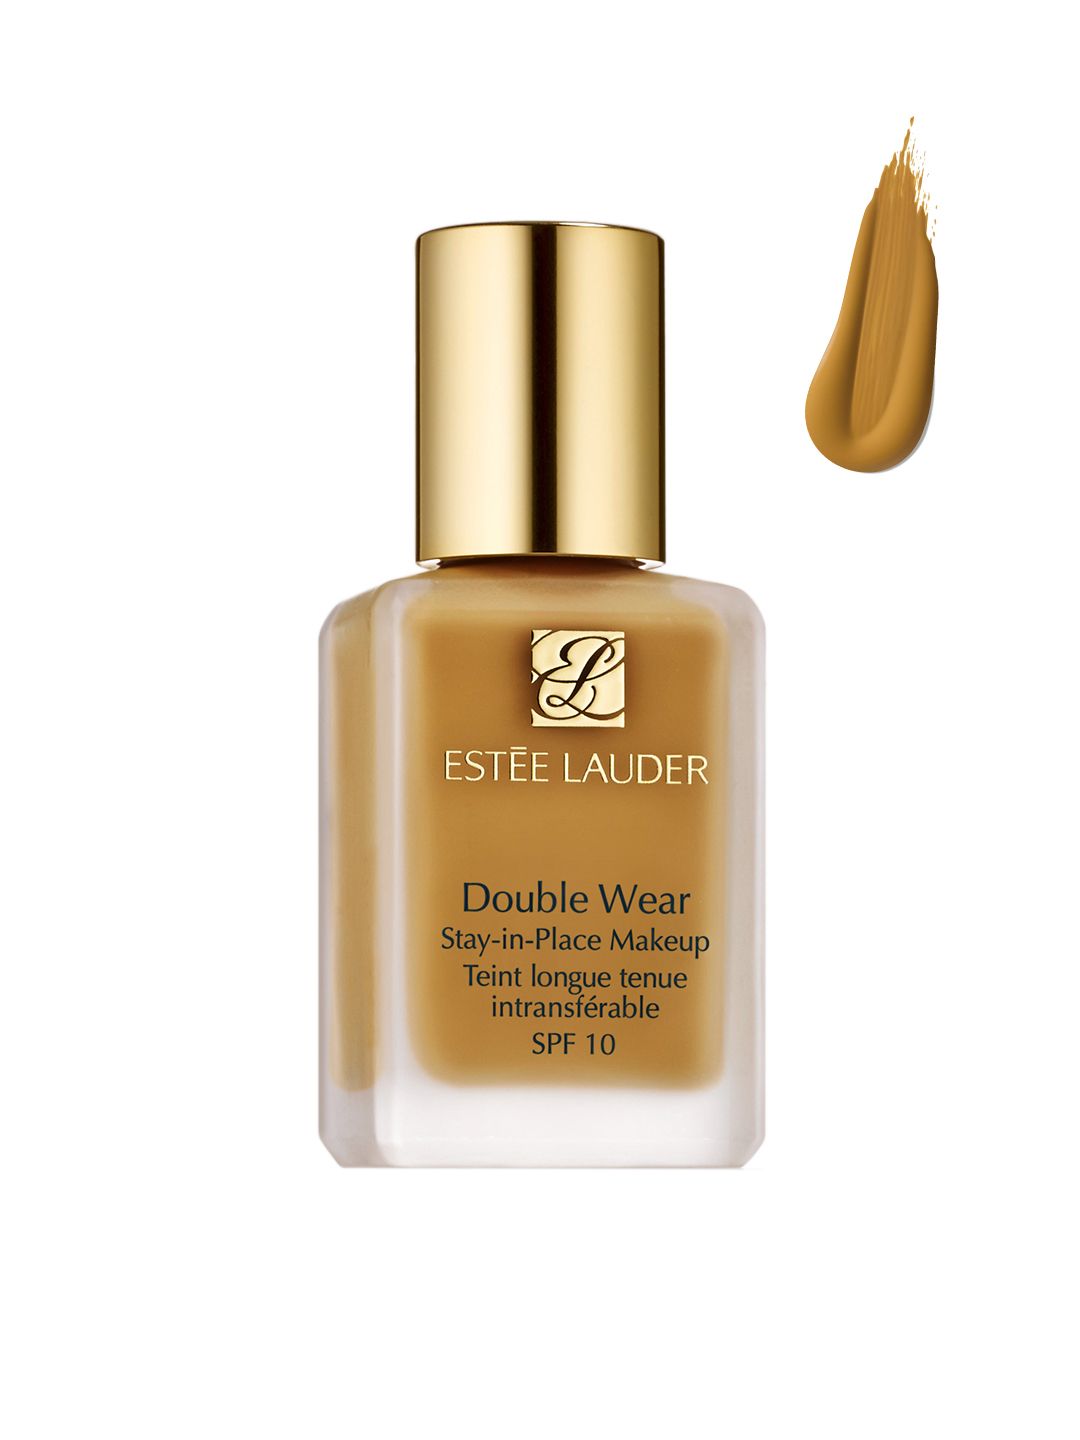 Estee Lauder Double Wear Stay-In-Place Liquid Foundation SPF 10 - Toasty Toffee 4W2 30ml Price in India